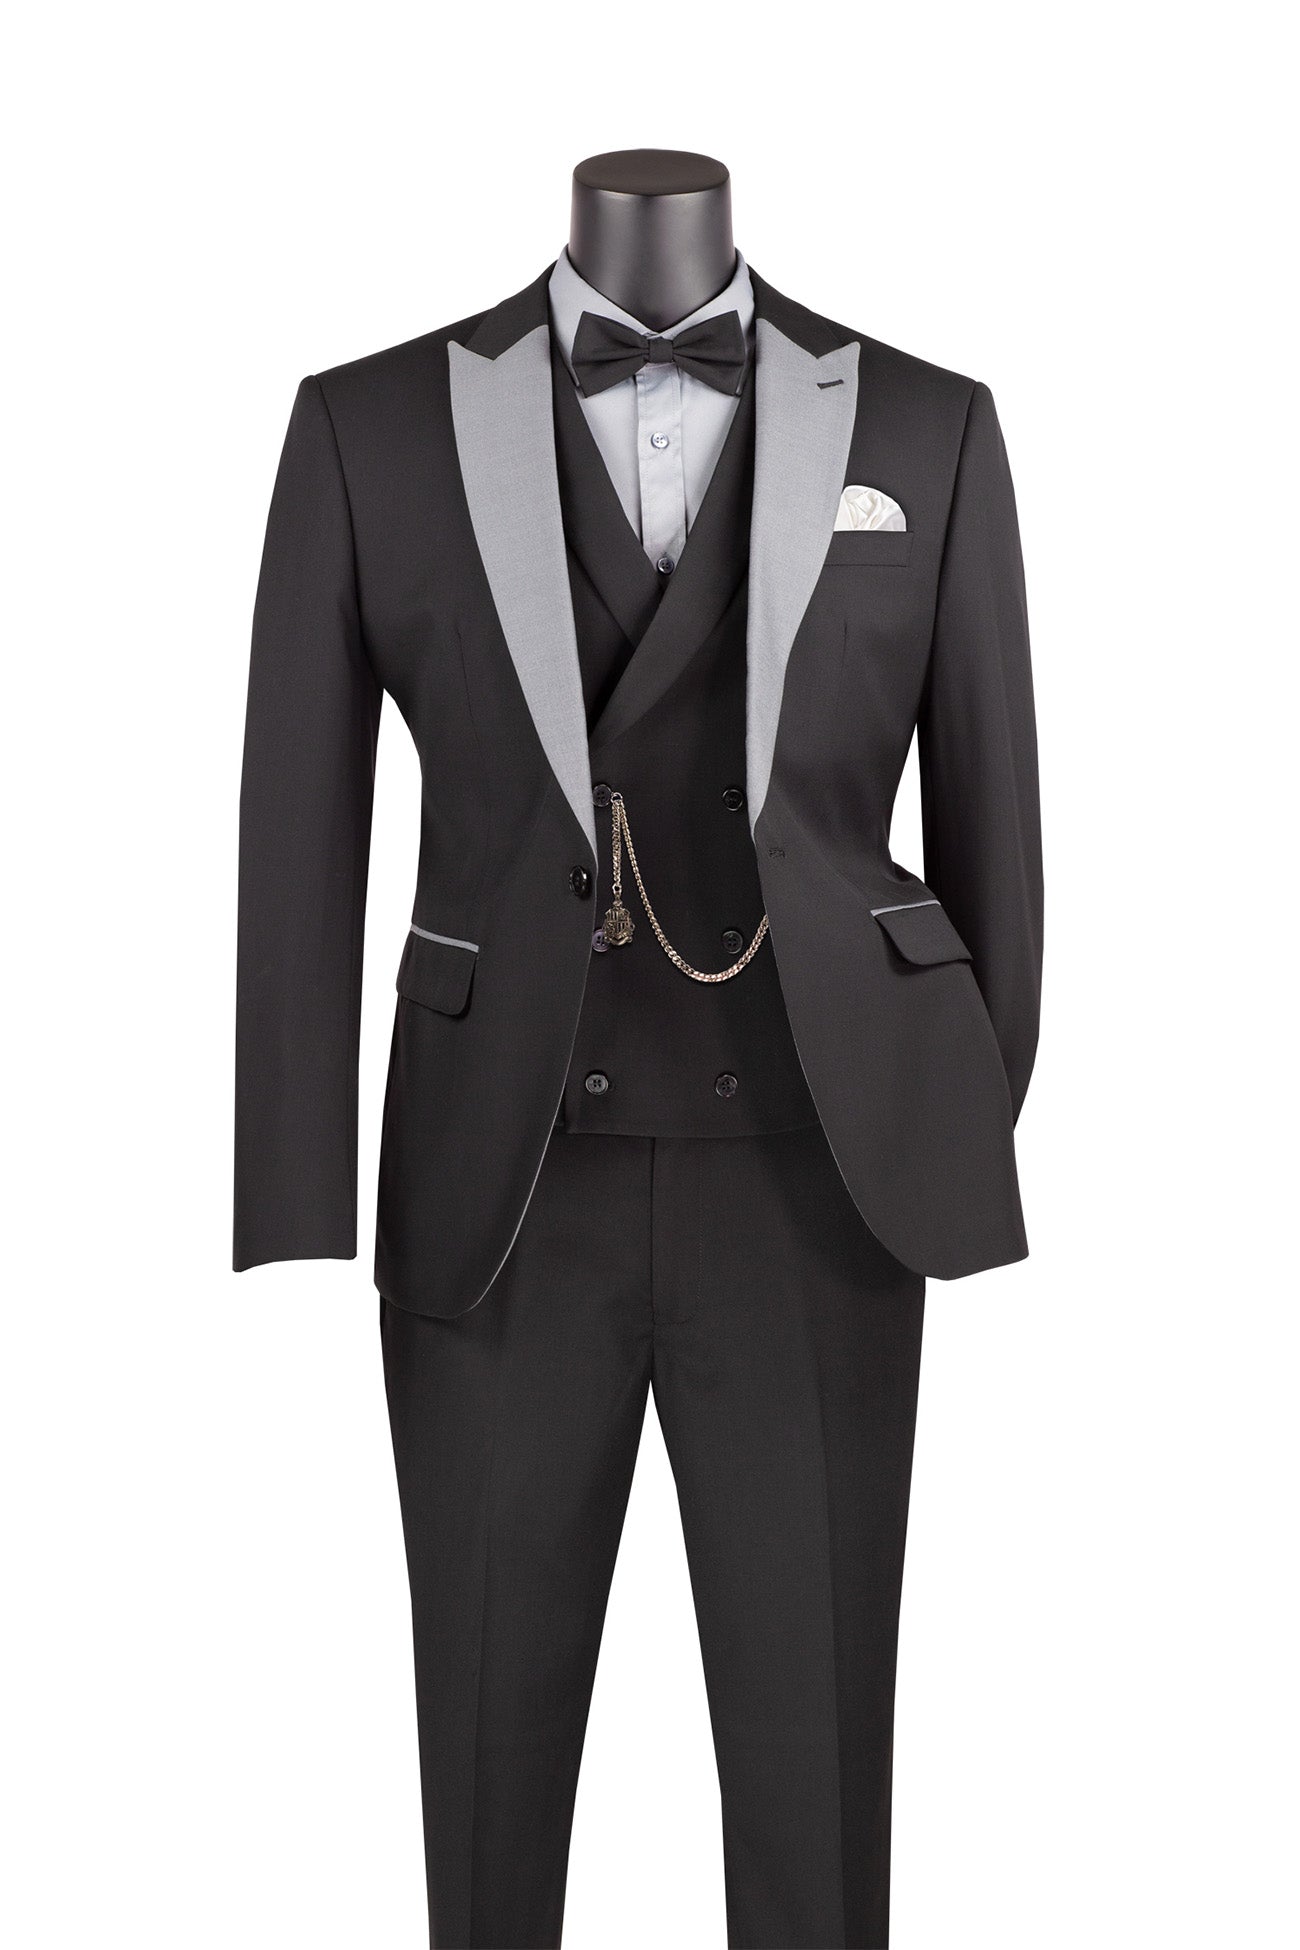 Slim Fit Tuxedo 3 Piece with Matching Bow Tie in Black